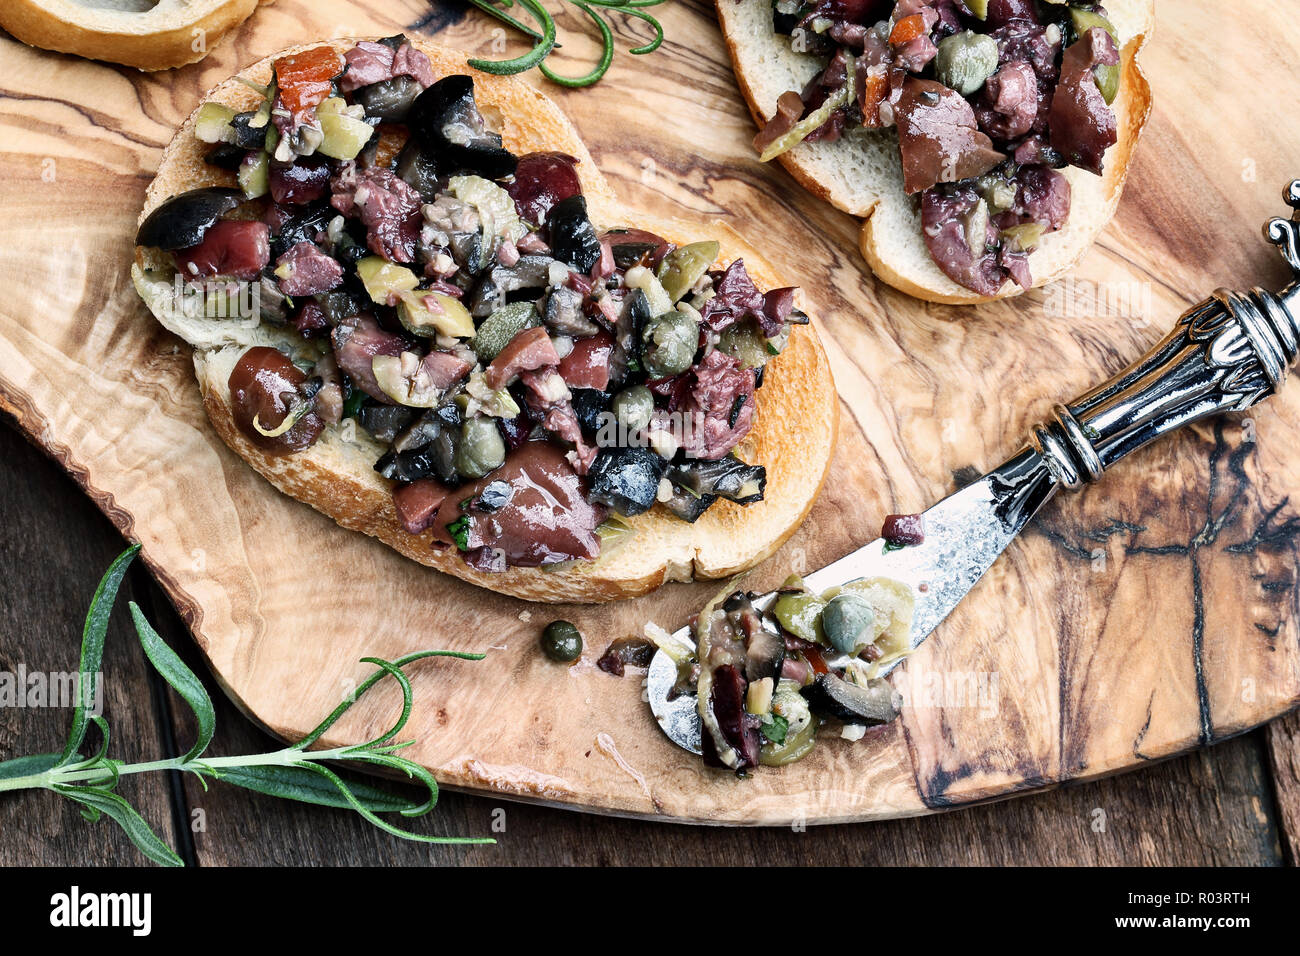 Homemade mixed Olive Tapenade made with garlic, capers, olive oil, Kalamata, black and green olives spread over toasted bread. Image shot from overhea Stock Photo